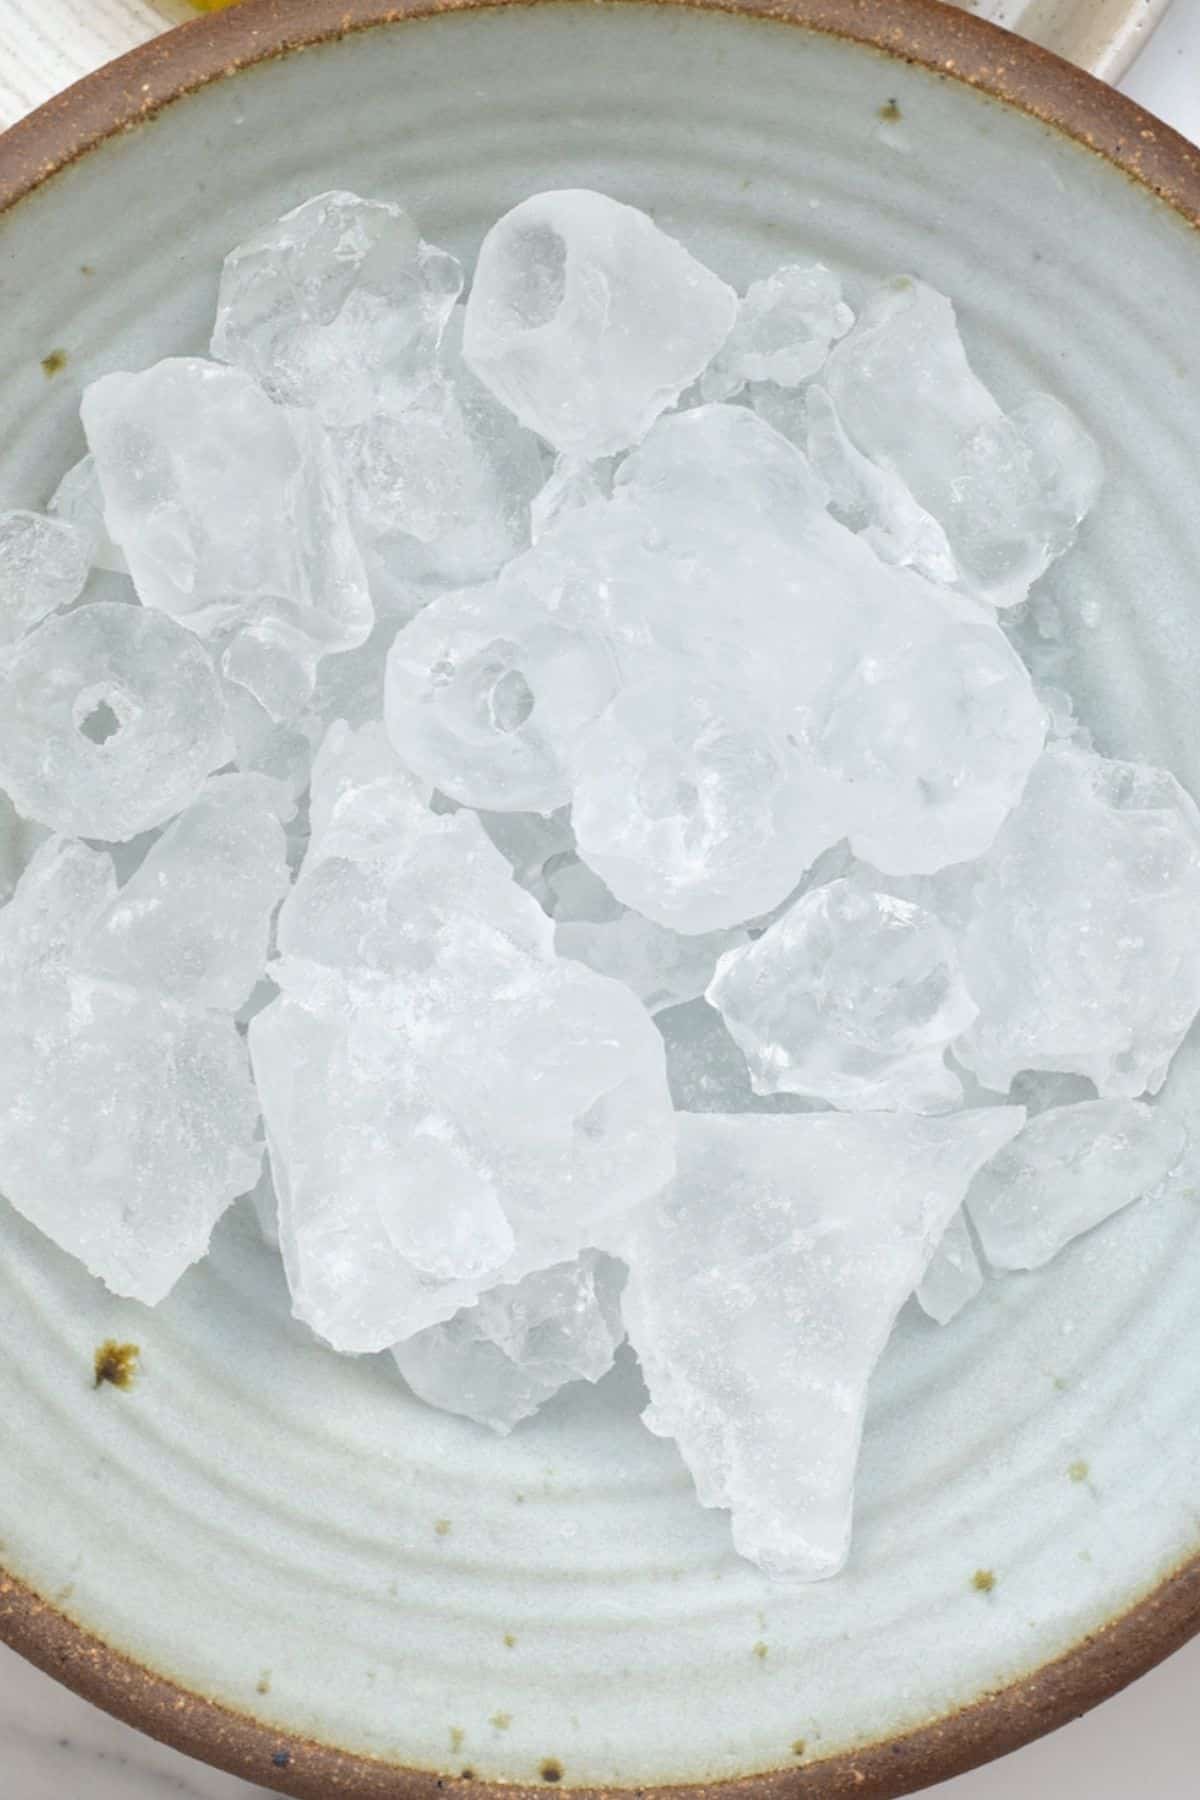 A bowl with ice cubes